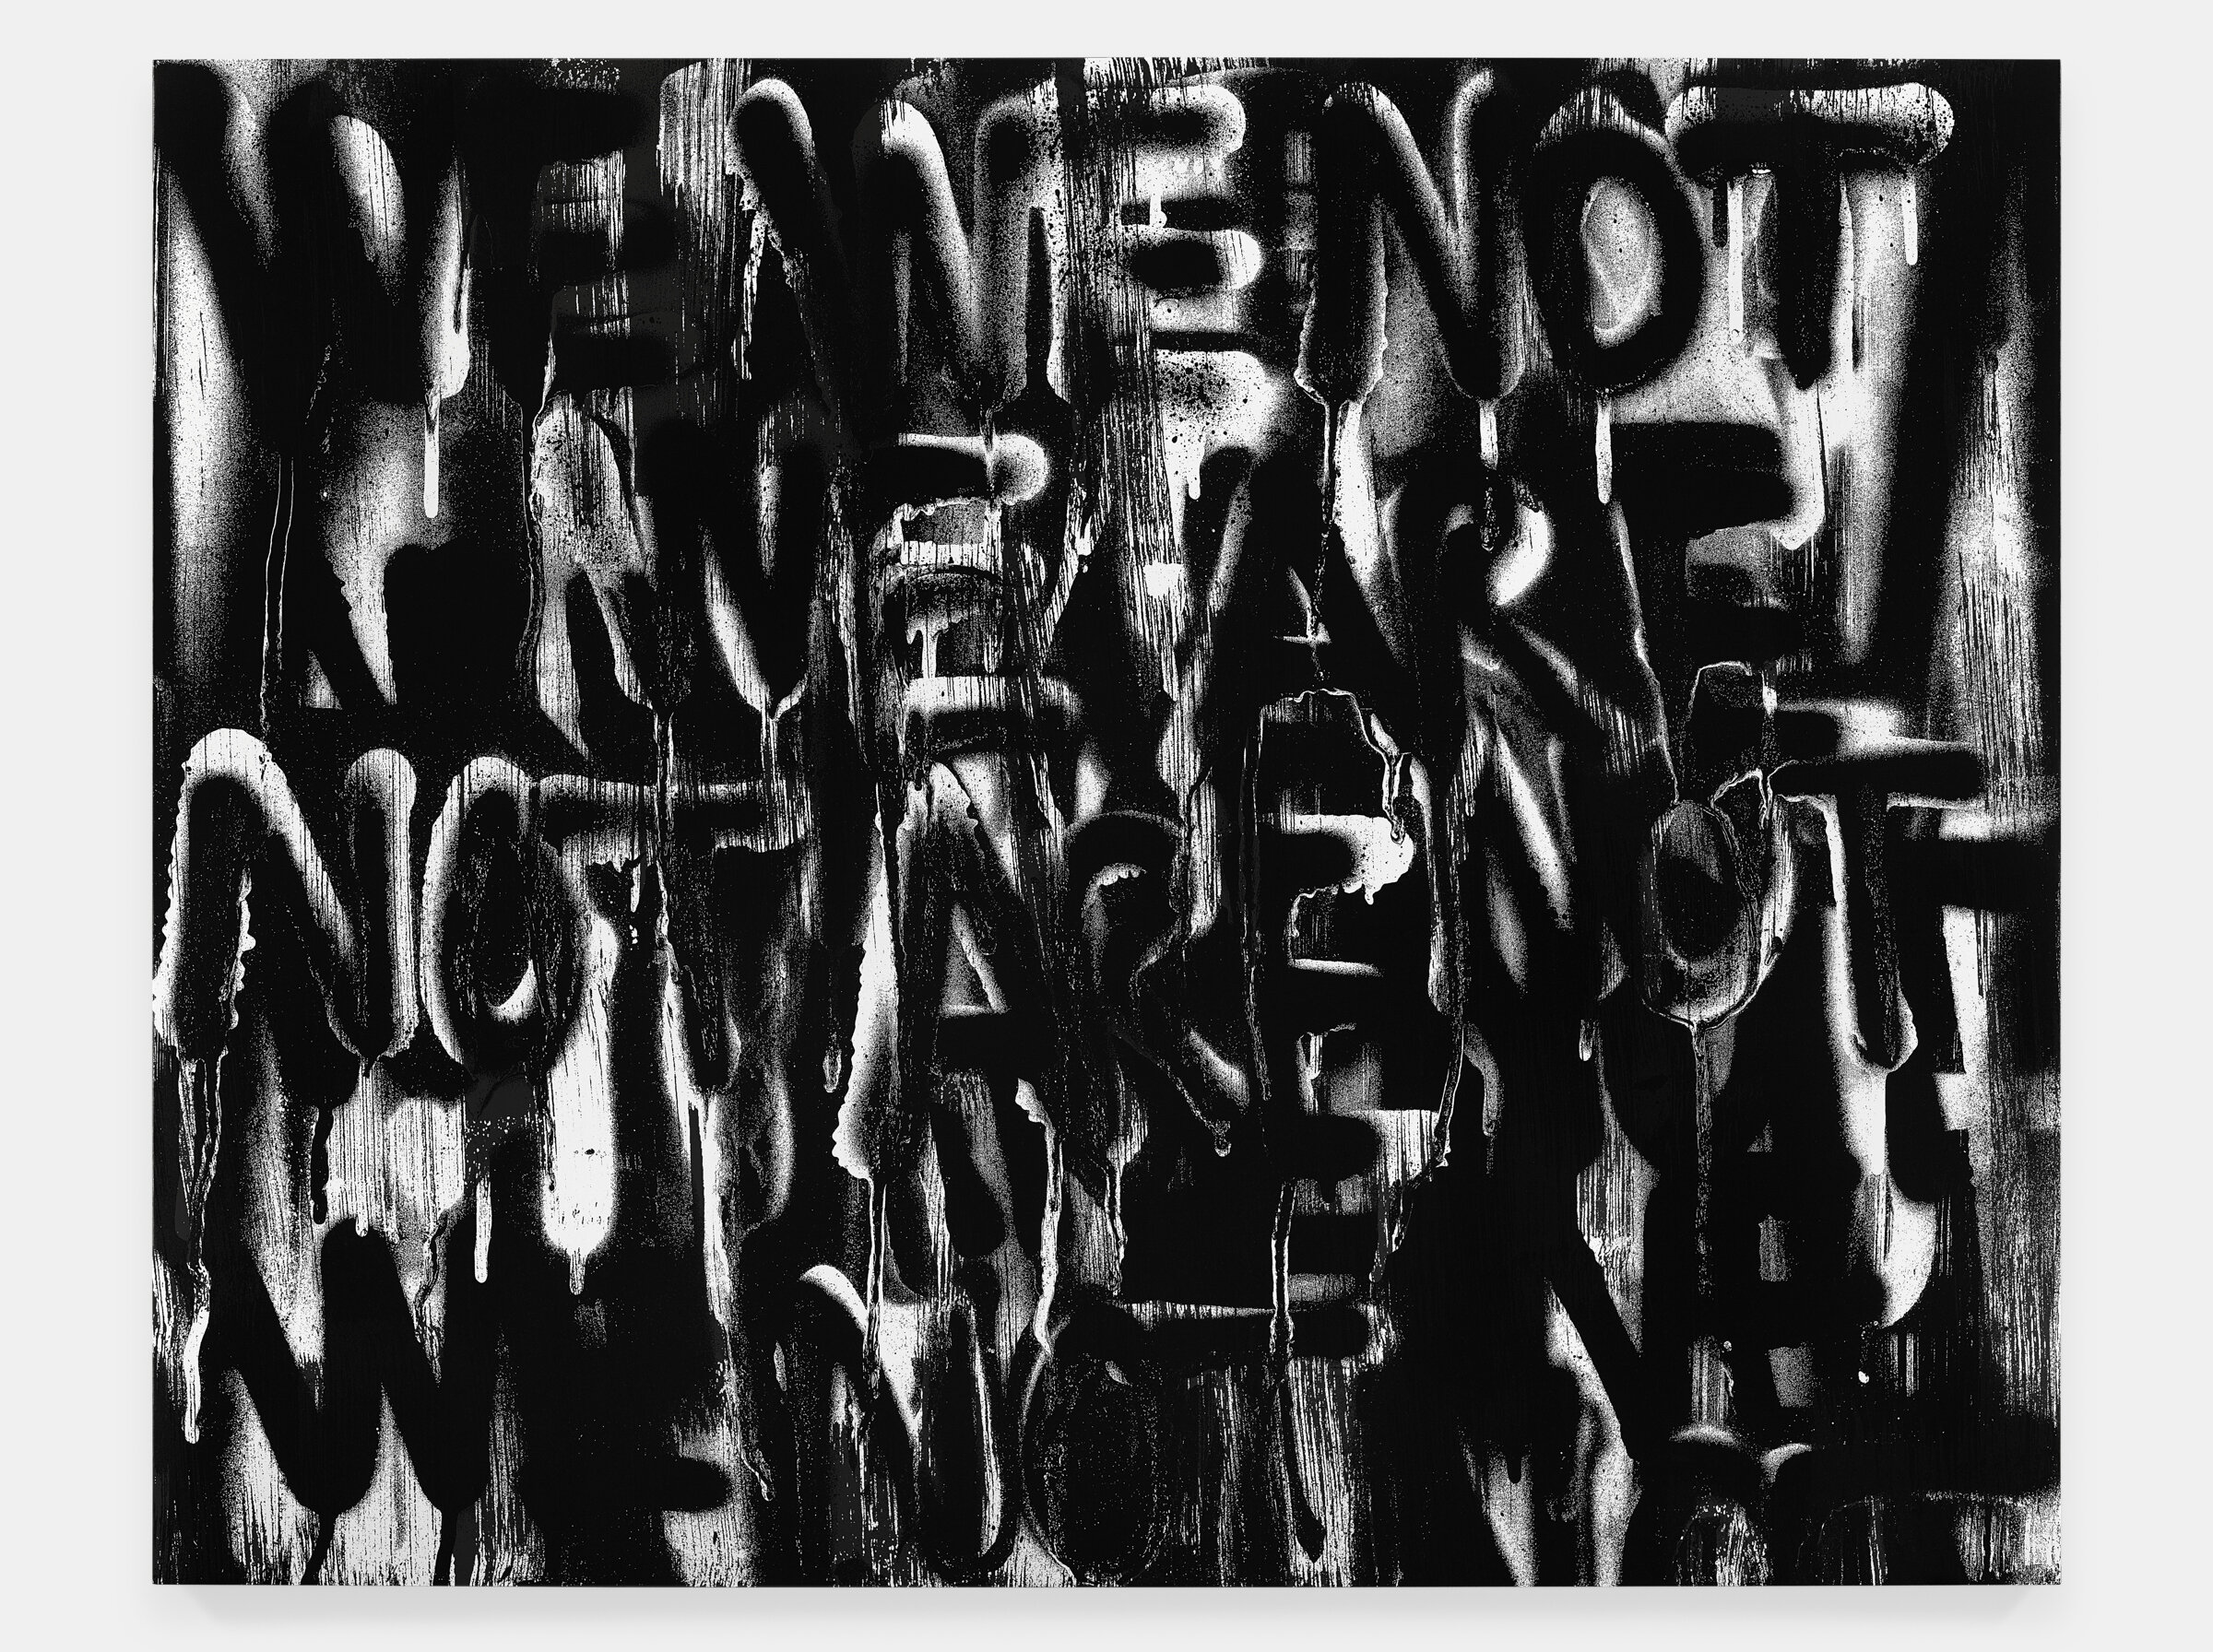 Adam Pendleton. “Untitled (WE ARE NOT)” (2020). Silkscreen ink on canvas. 96” x 120”. Image courtesy of the artist and David Kordansky Gallery.